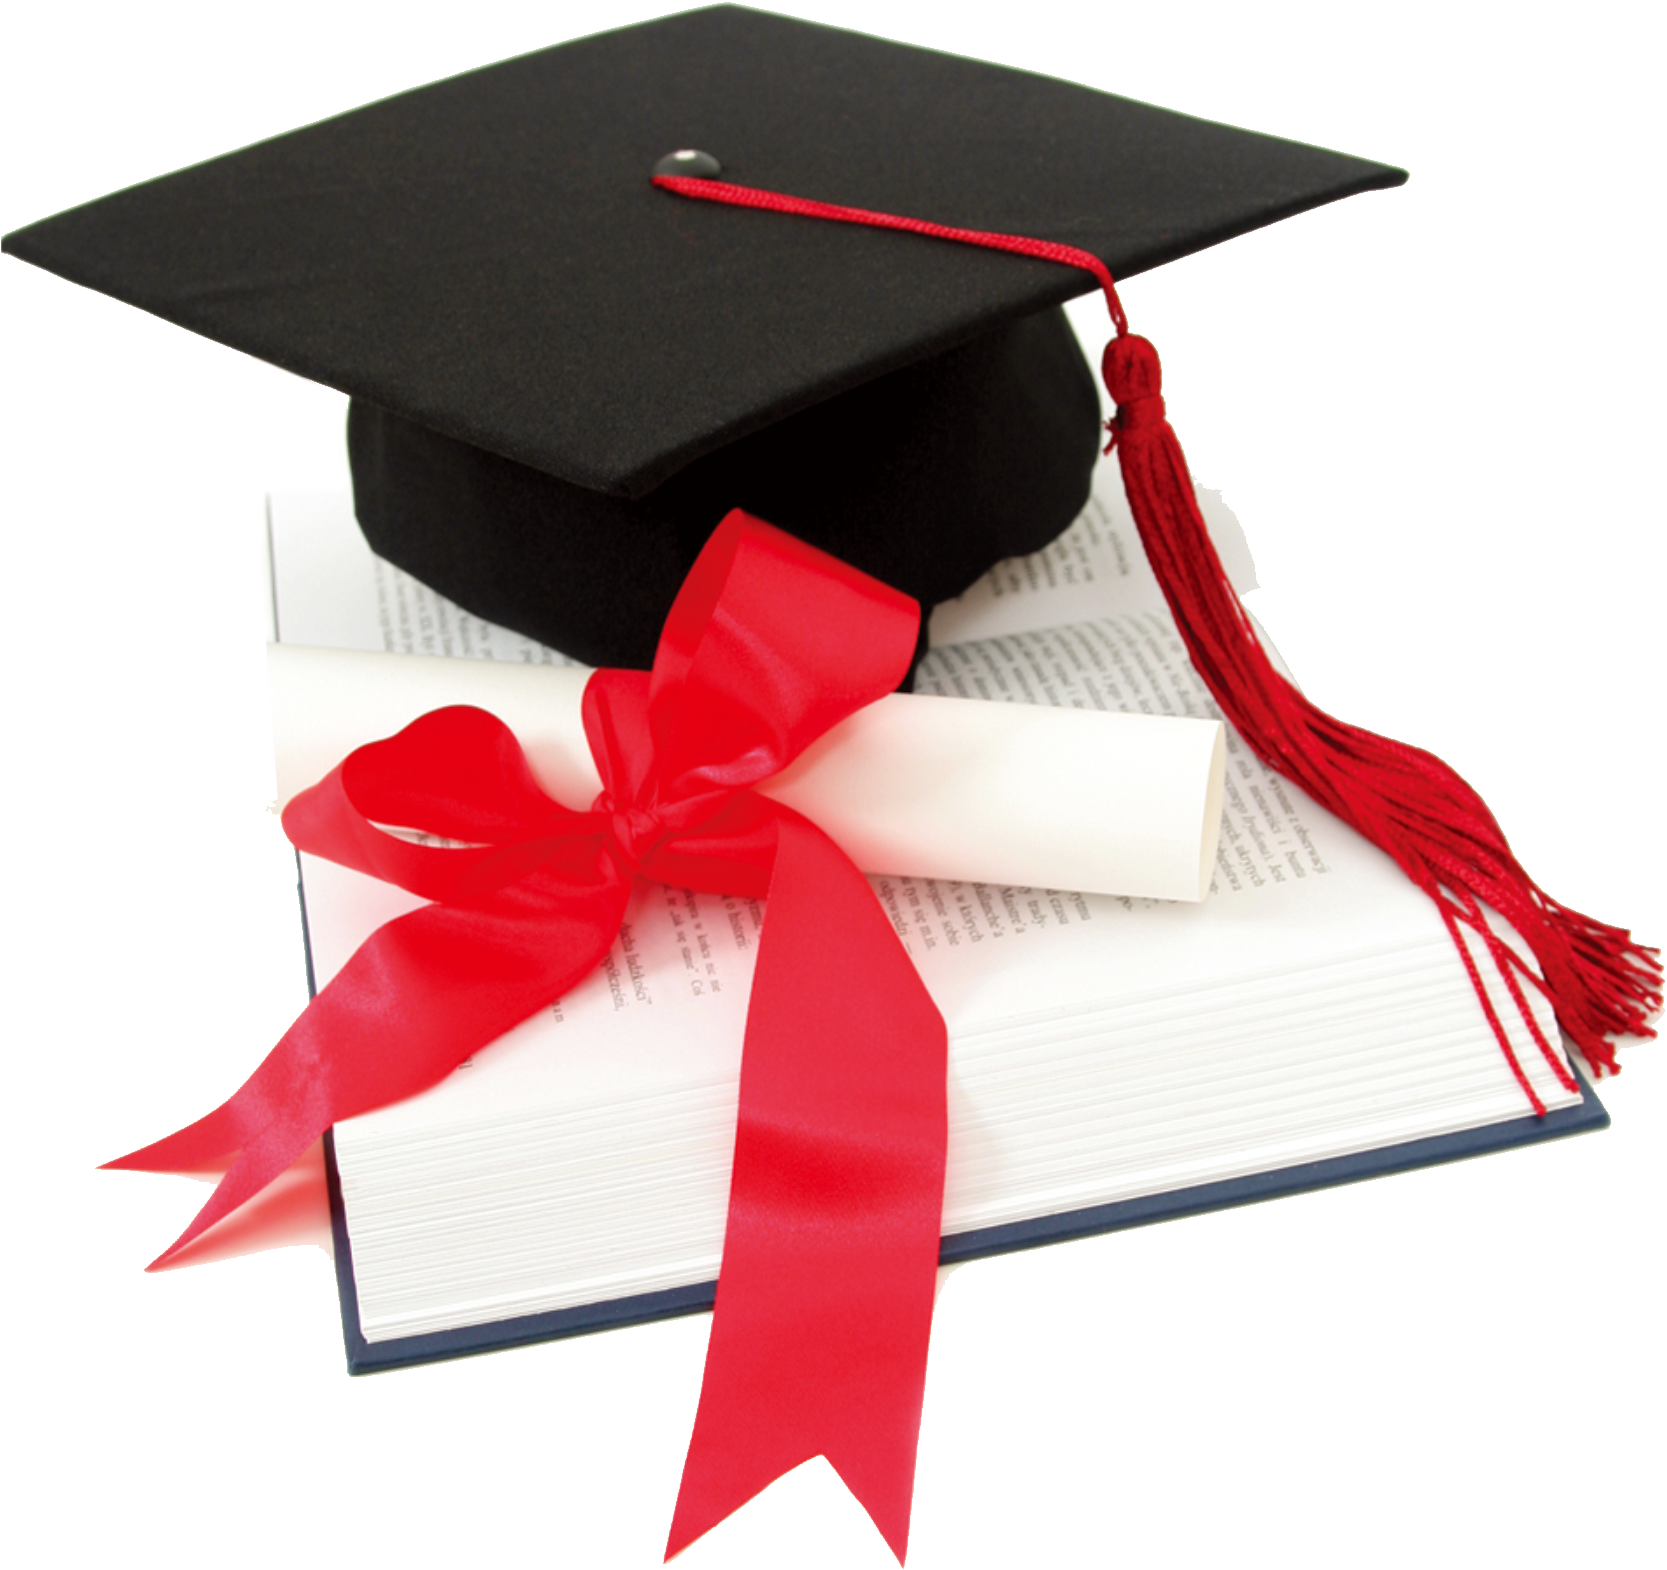 Student Graduation Ceremony Academic Degree Diploma - Get Into College At 16 (2480x3508)